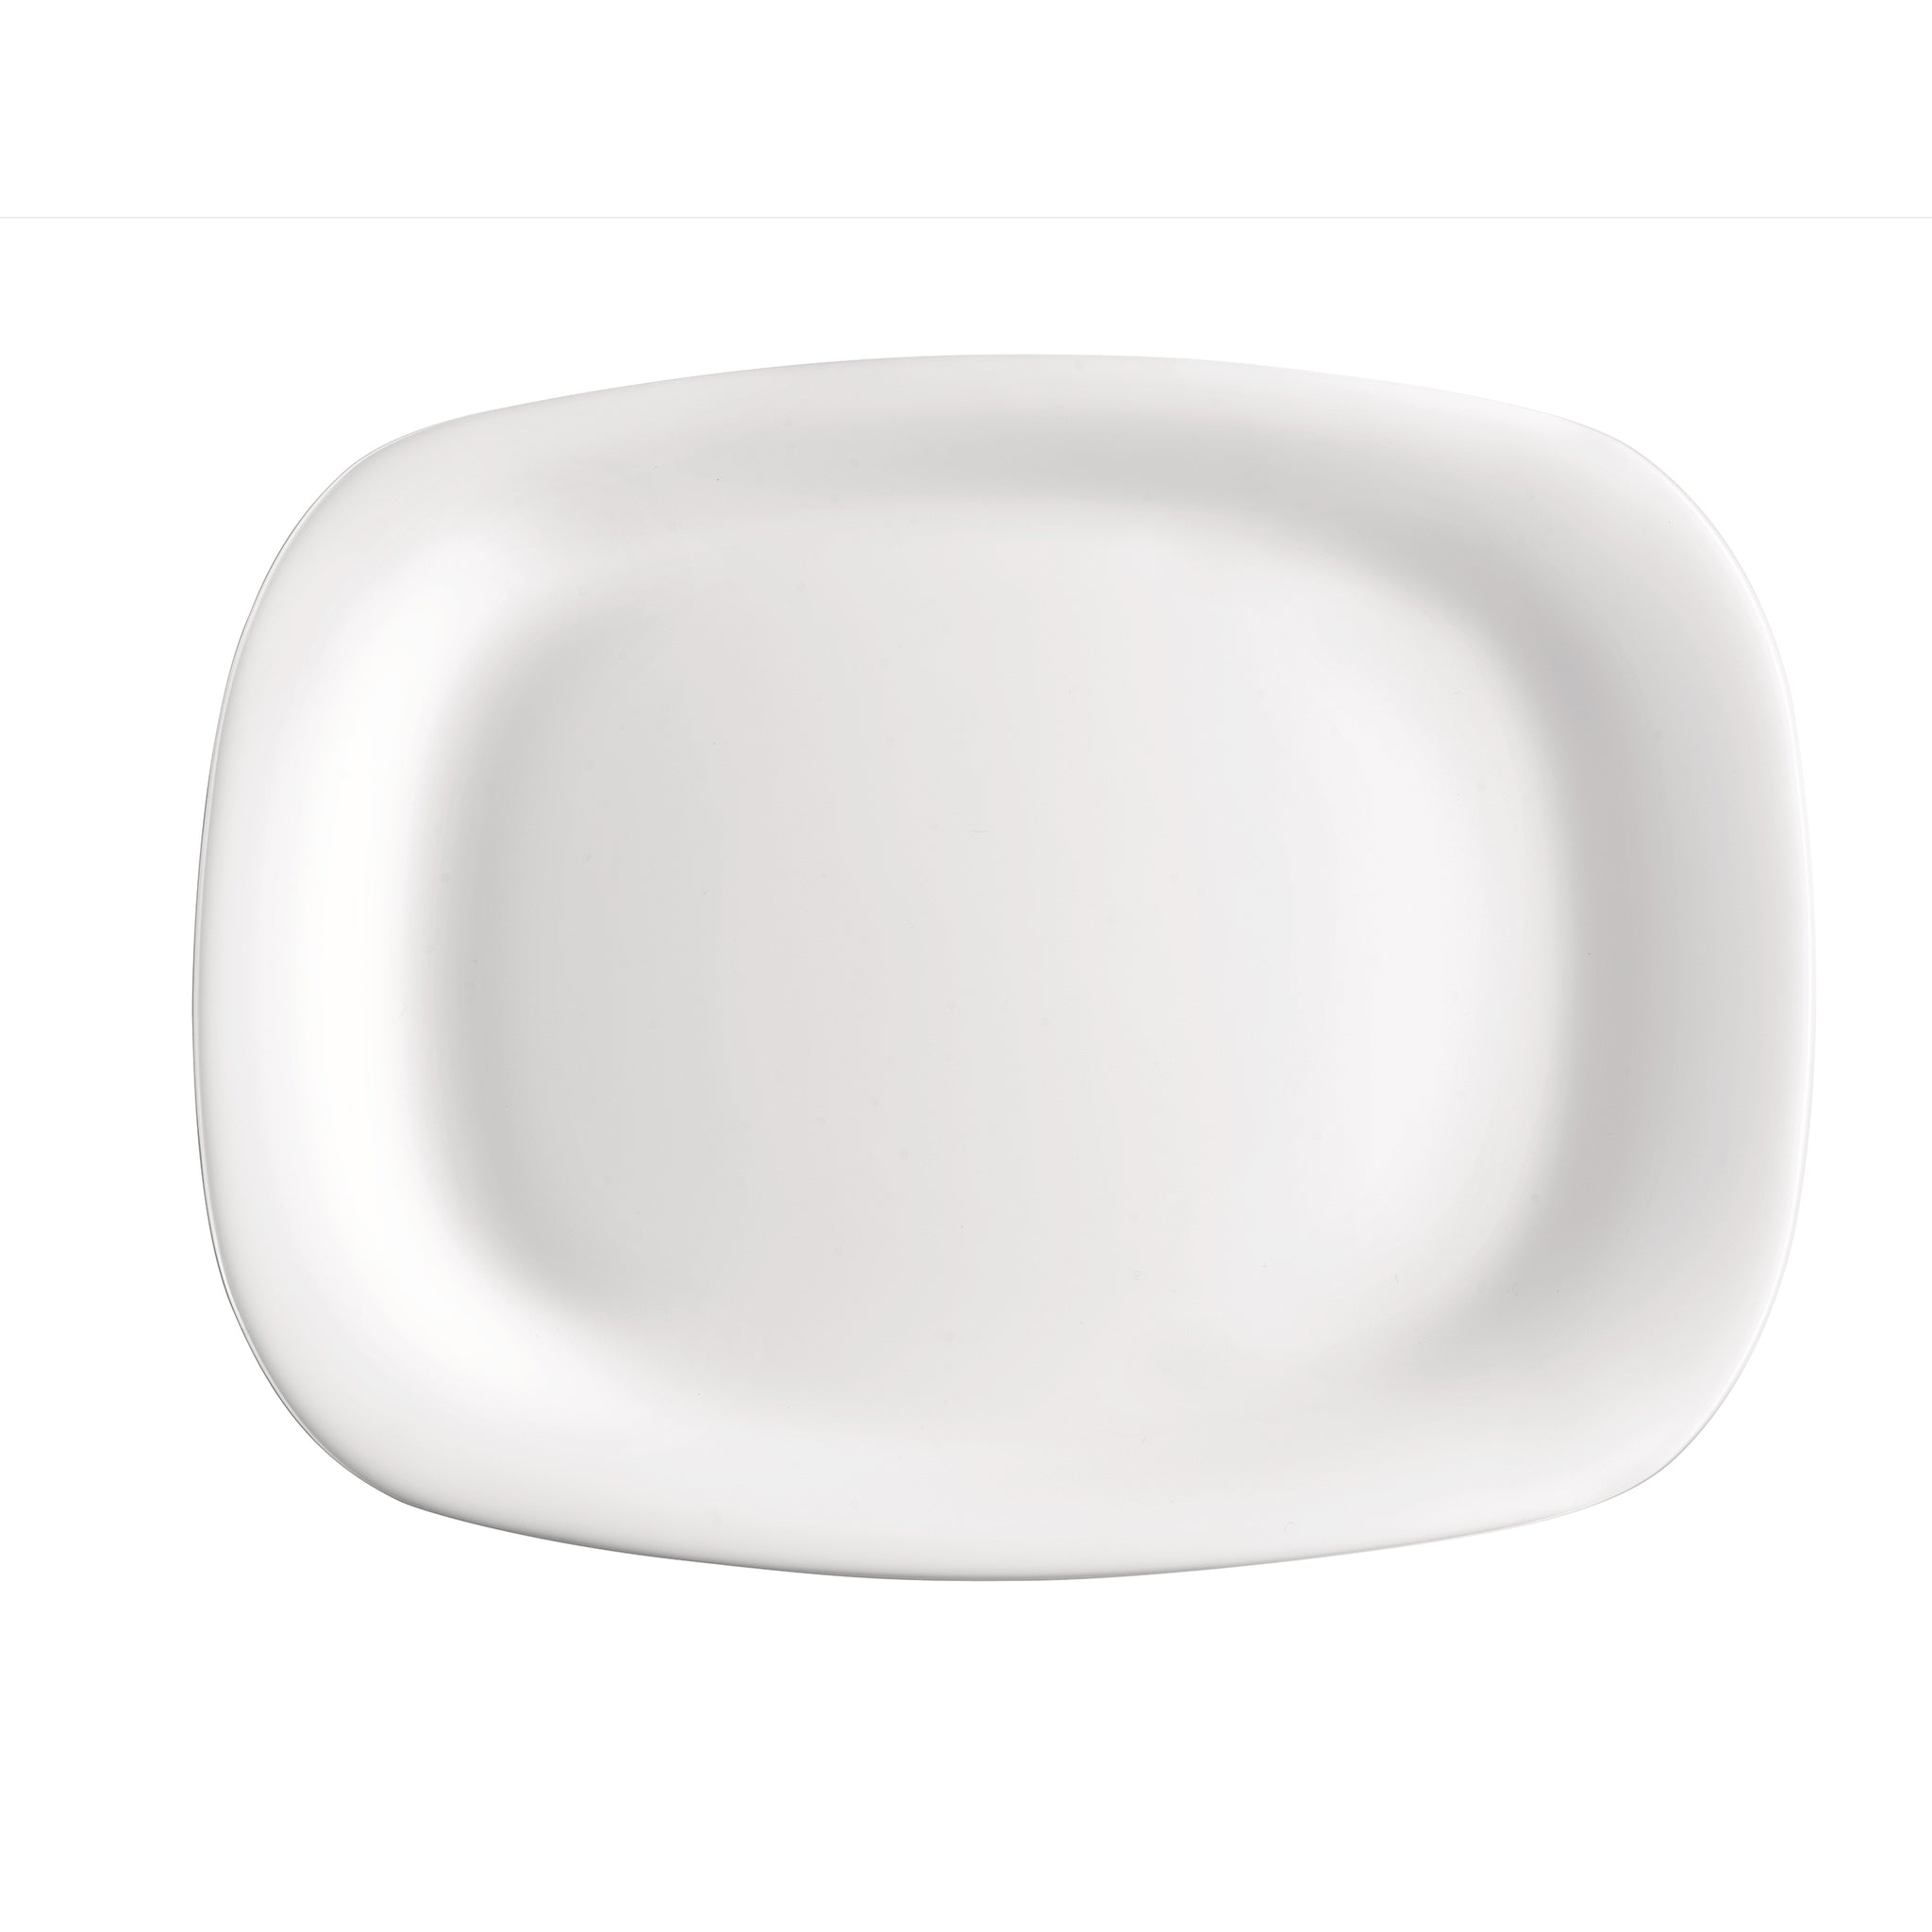 Parma 13.25" x 9.5" Opal Glass Serving Plate (Set of 12)